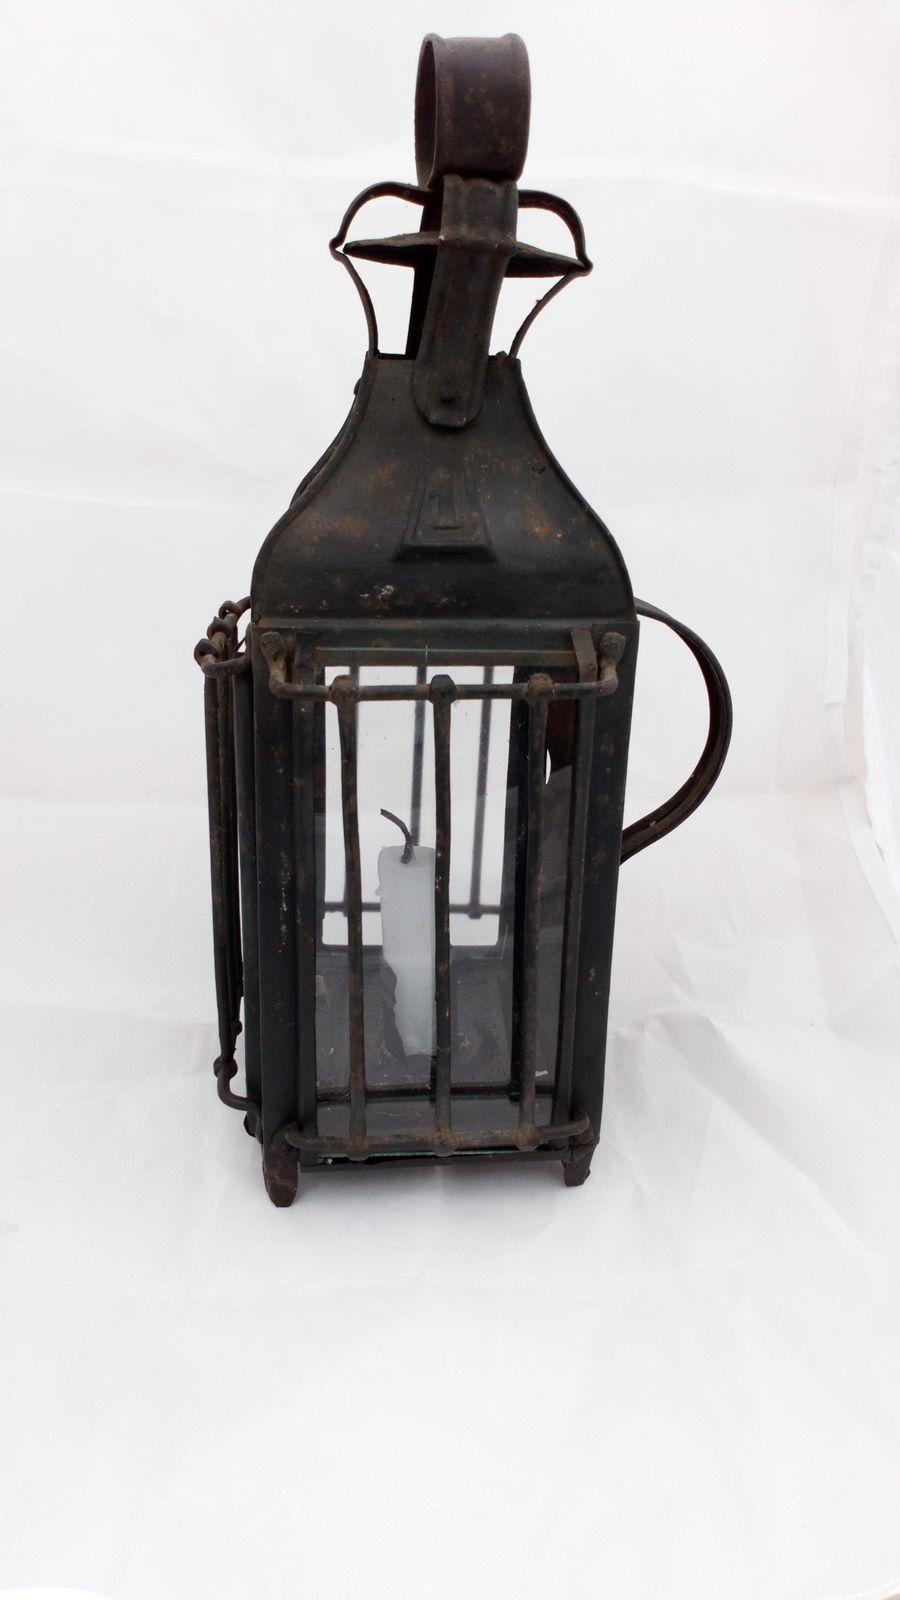 Tin Hand Held Candle Storm Lantern No 1 Toleware Hurricane Lamp Antique 19th C